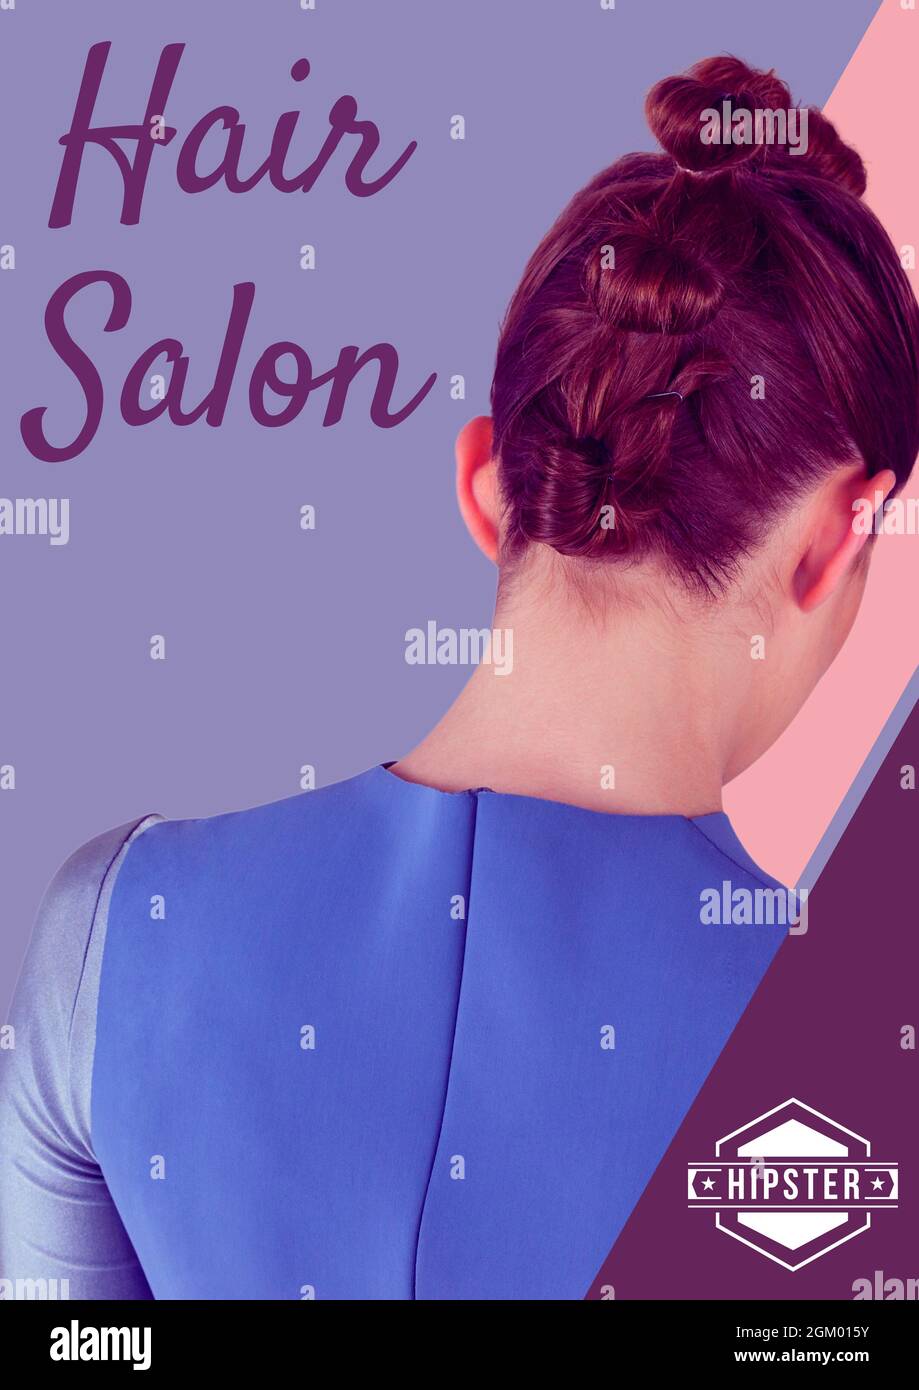 Hair salon text against rear view of woman's hairstyle Stock Photo